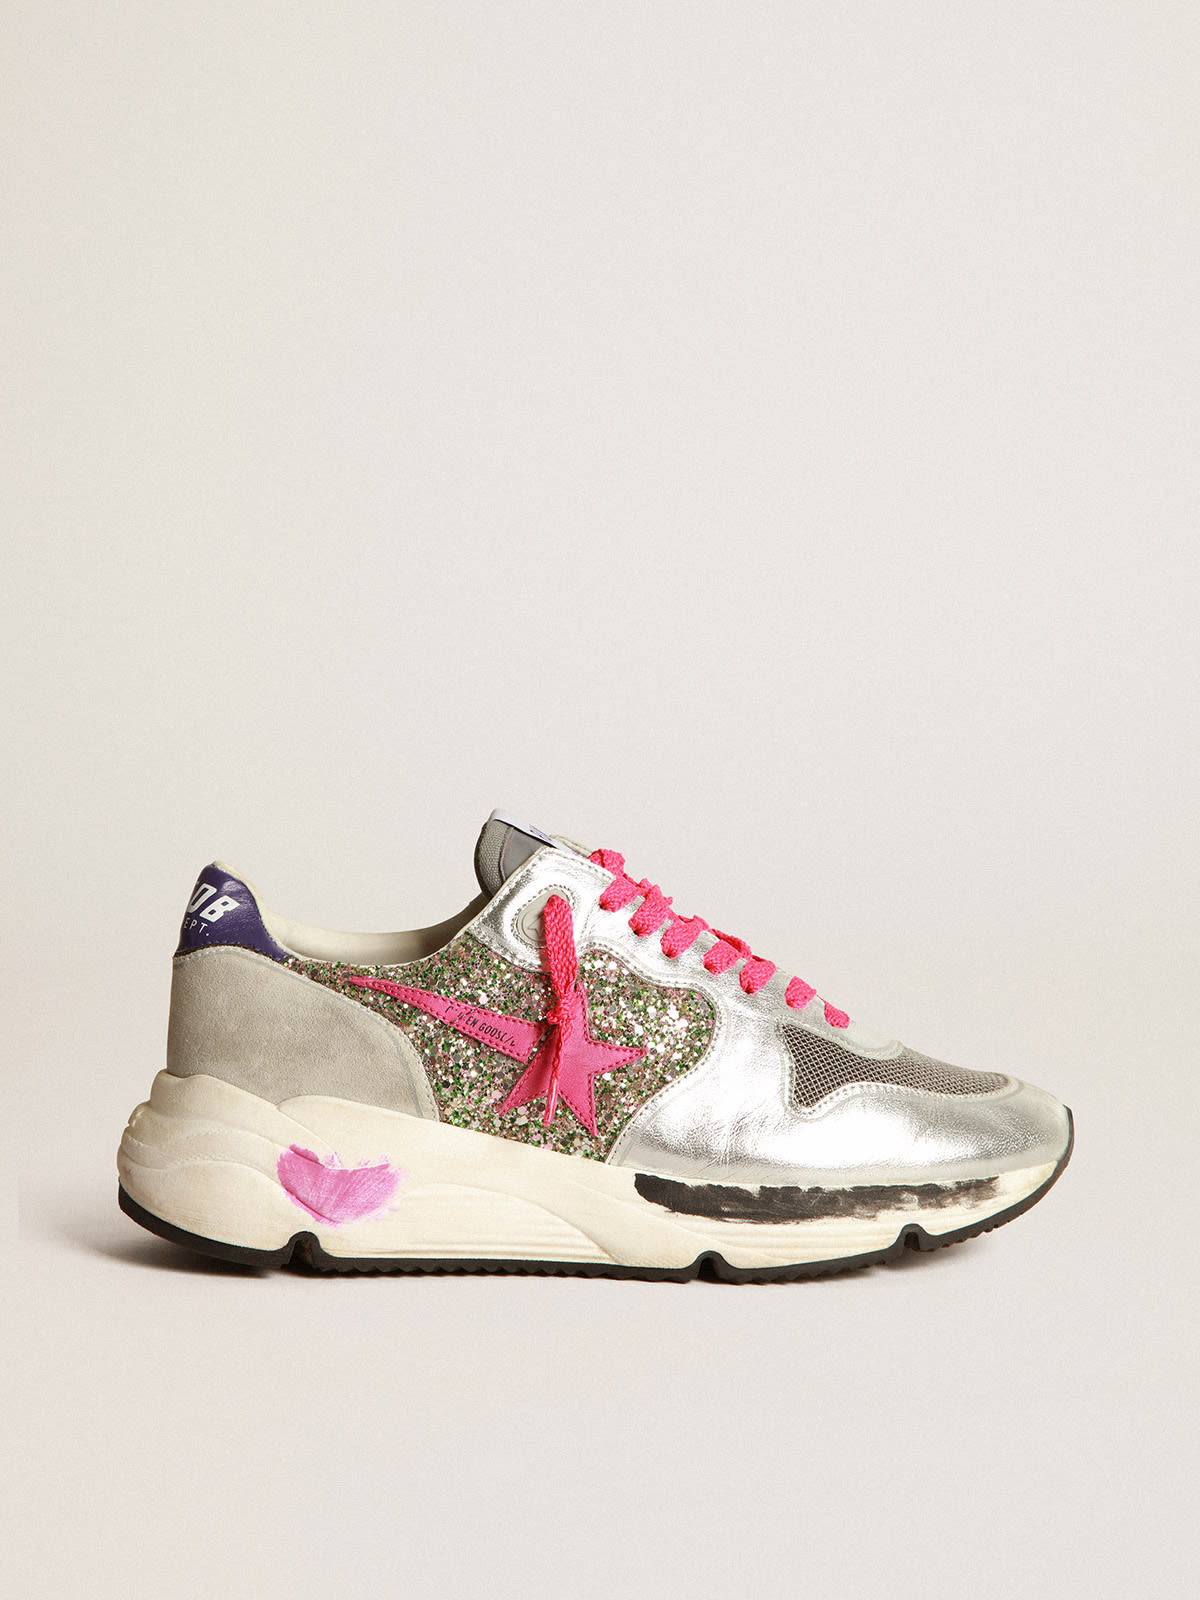 Running Sole sneakers in metallic leather and glitter | Golden Goose